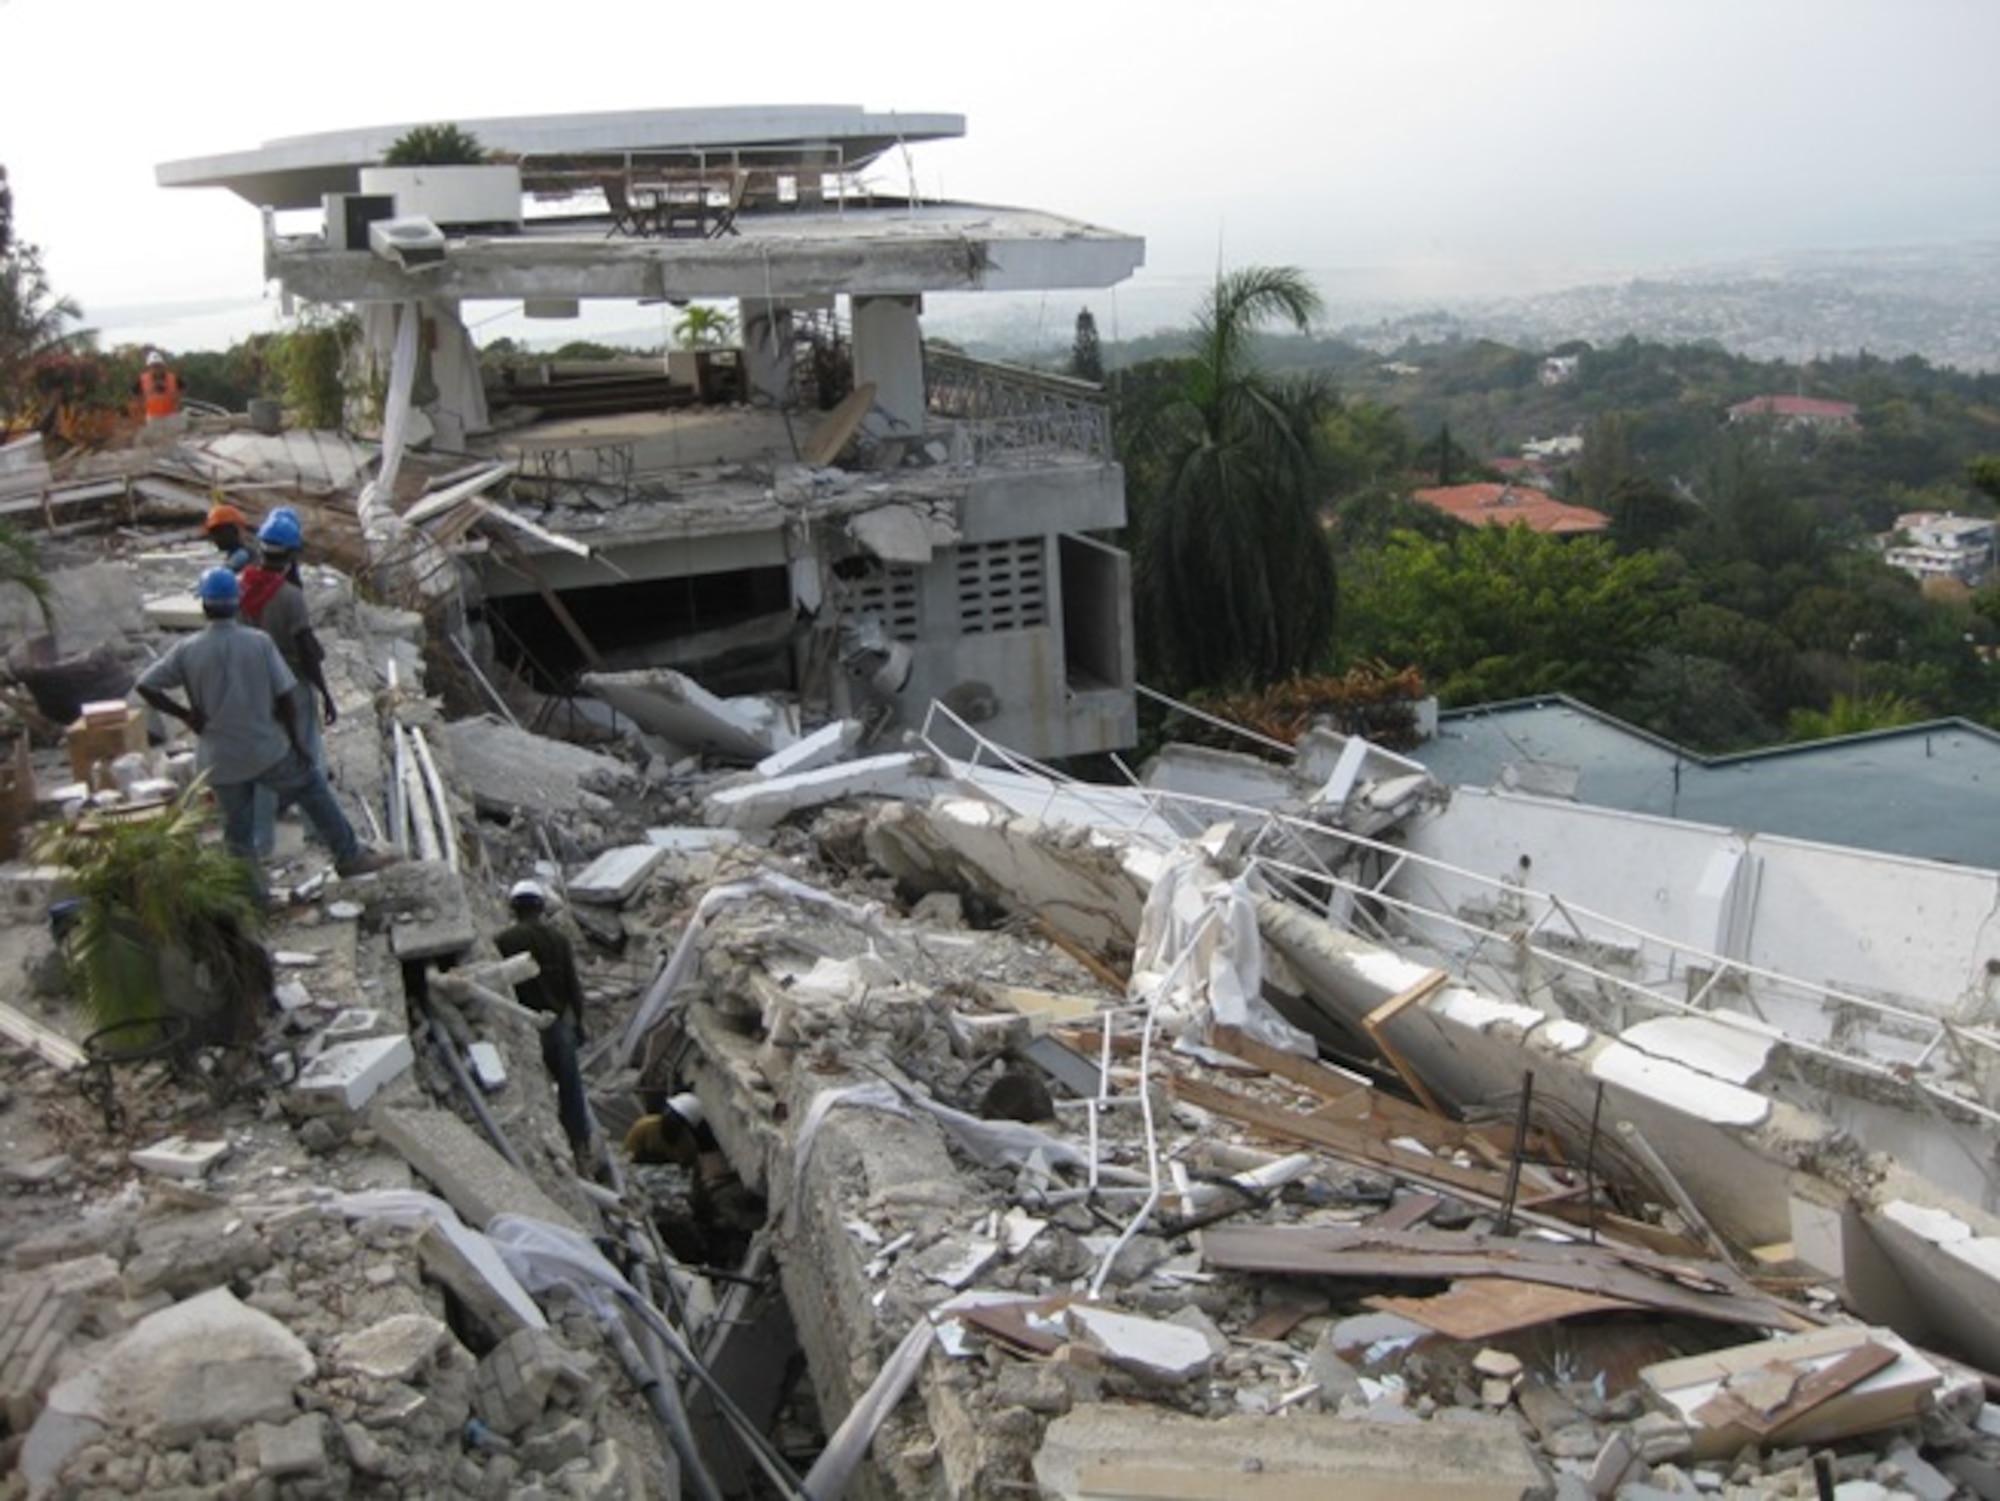 One of the buildings is seen that crumbled to piles of rock and debris after the devastating 7.0 earthquake hit on Jan. 12, 2010, in Haiti, taking the lives of more than 200,000 people. (Photo courtesy of TSgt. Bambi Putinas)
